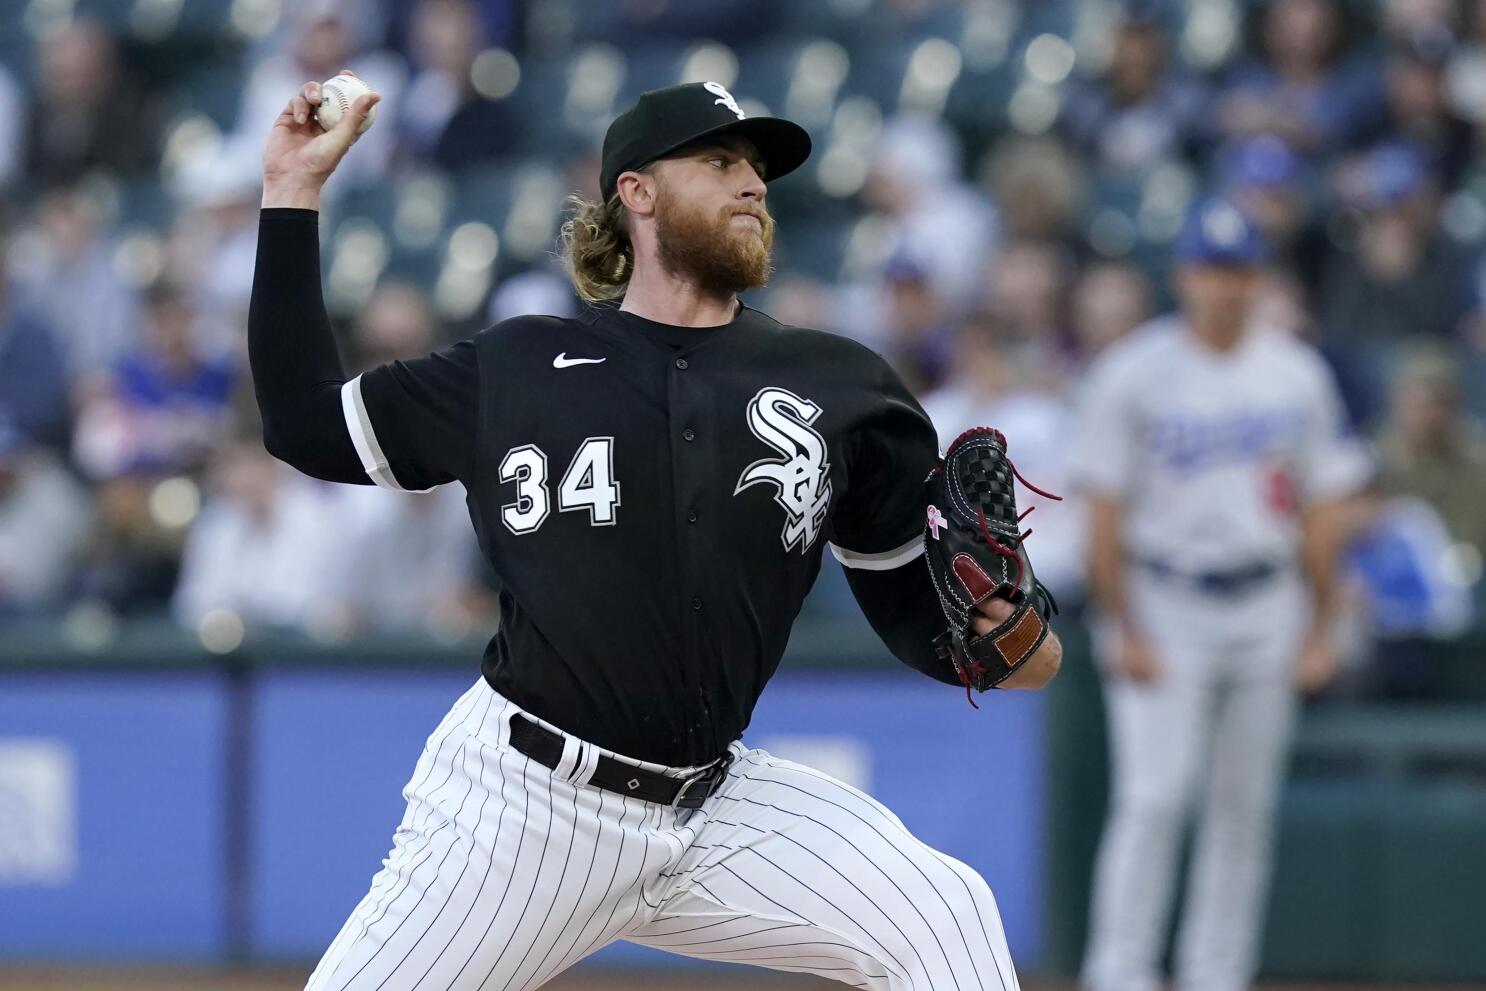 Kopech, Pollock lead White Sox to 4-0 win over Dodgers